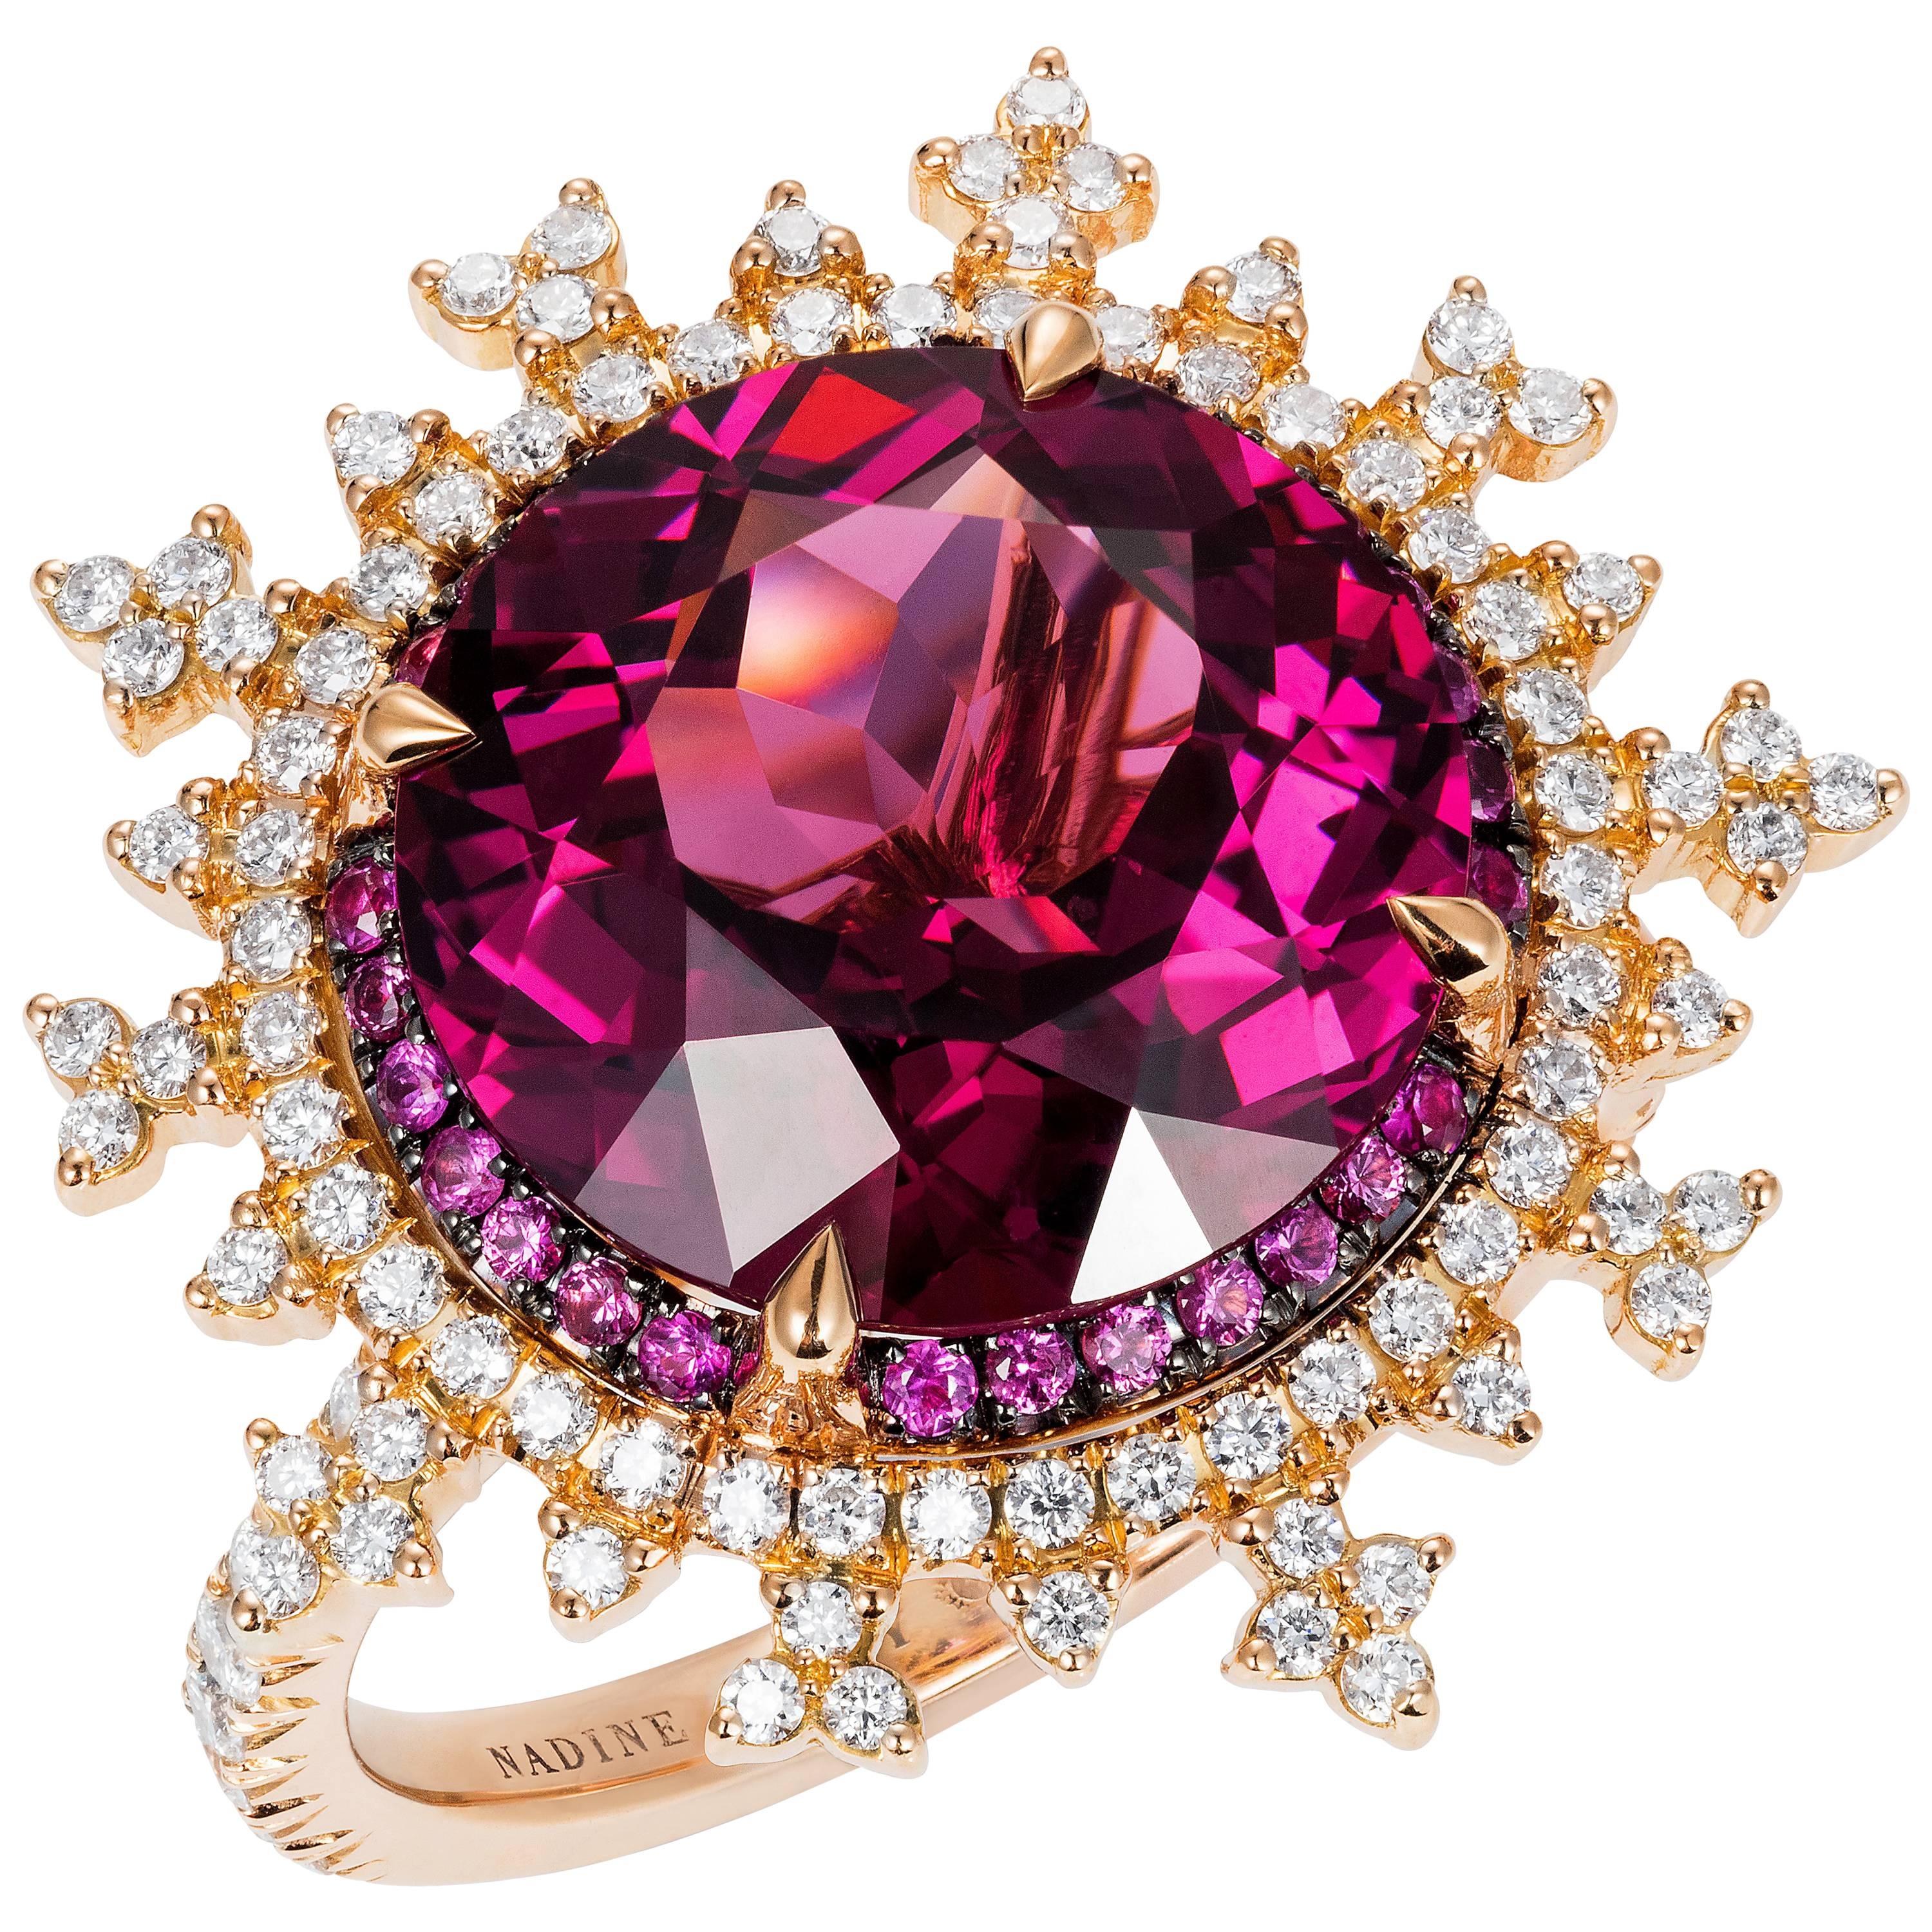 Nadine Aysoy 18 Karat Rose Gold, Red Rhodolite and White Diamond Cocktail Ring For Sale